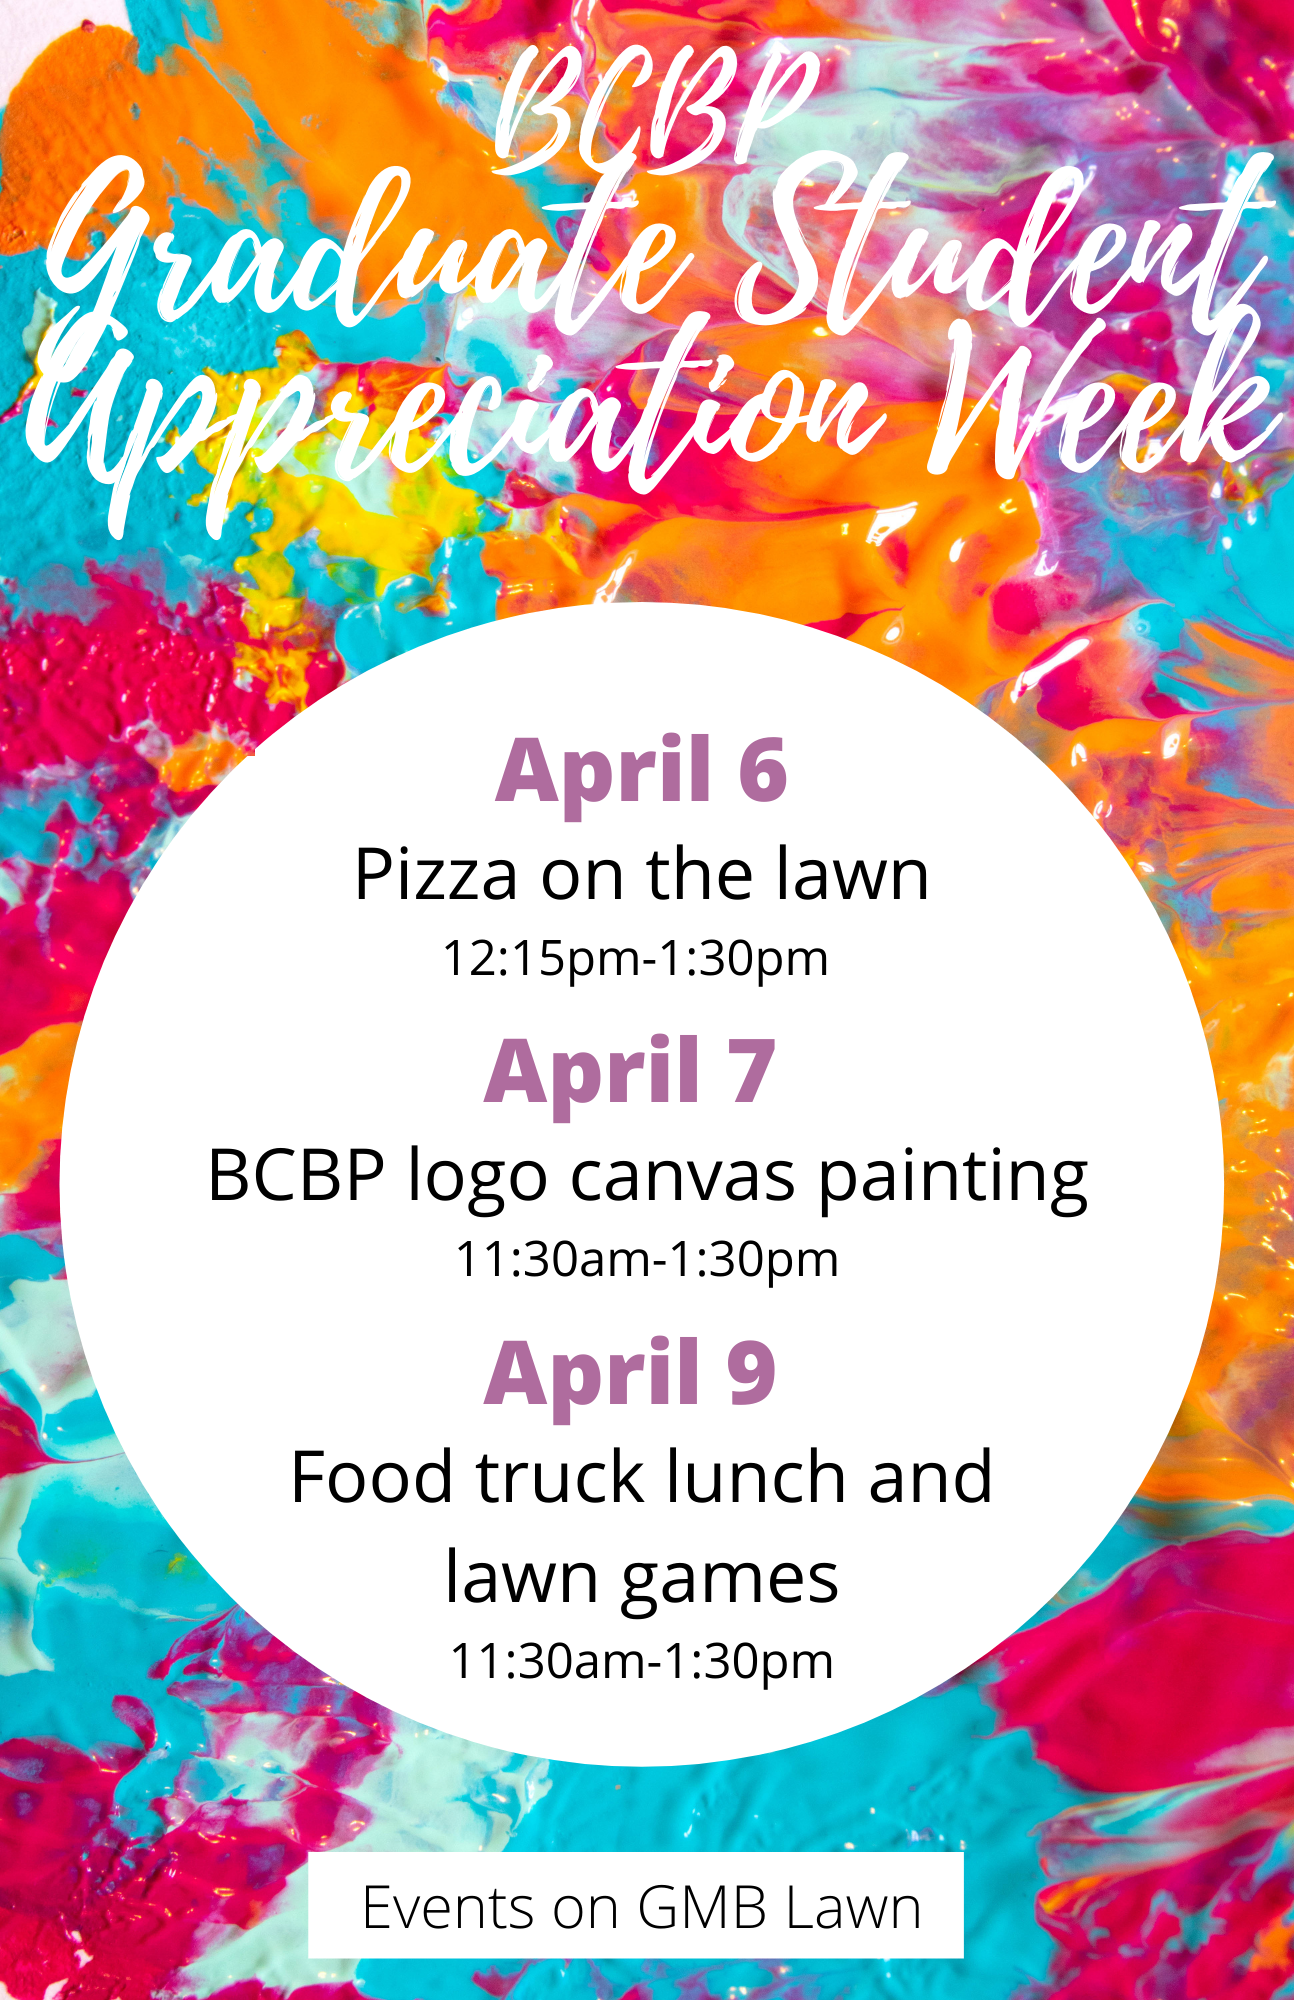 BCBP Graduate Student Appreciation Week all text in the post